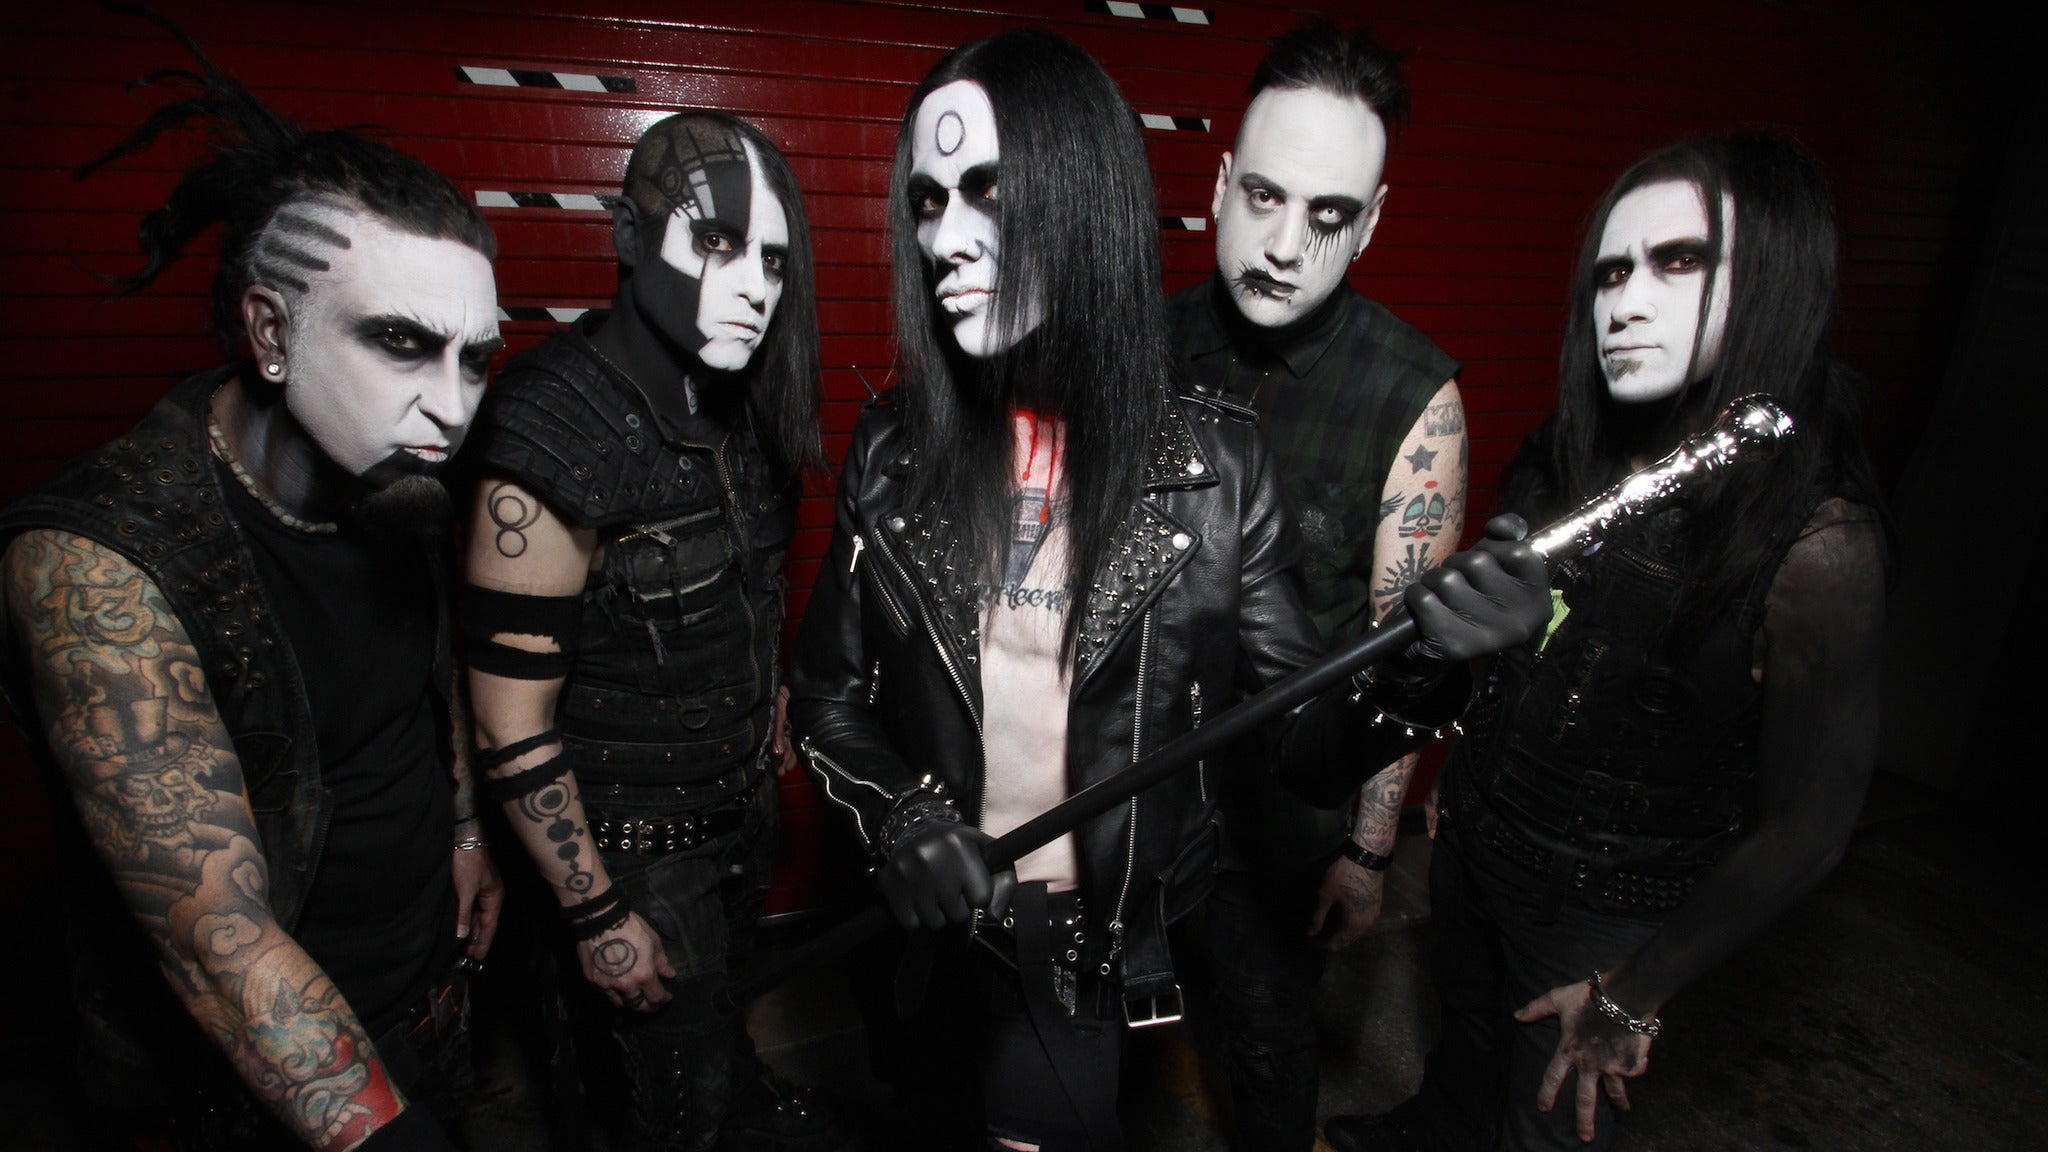 Wednesday 13: Tour Dates & Tickets, Tour History, Setlists, Links